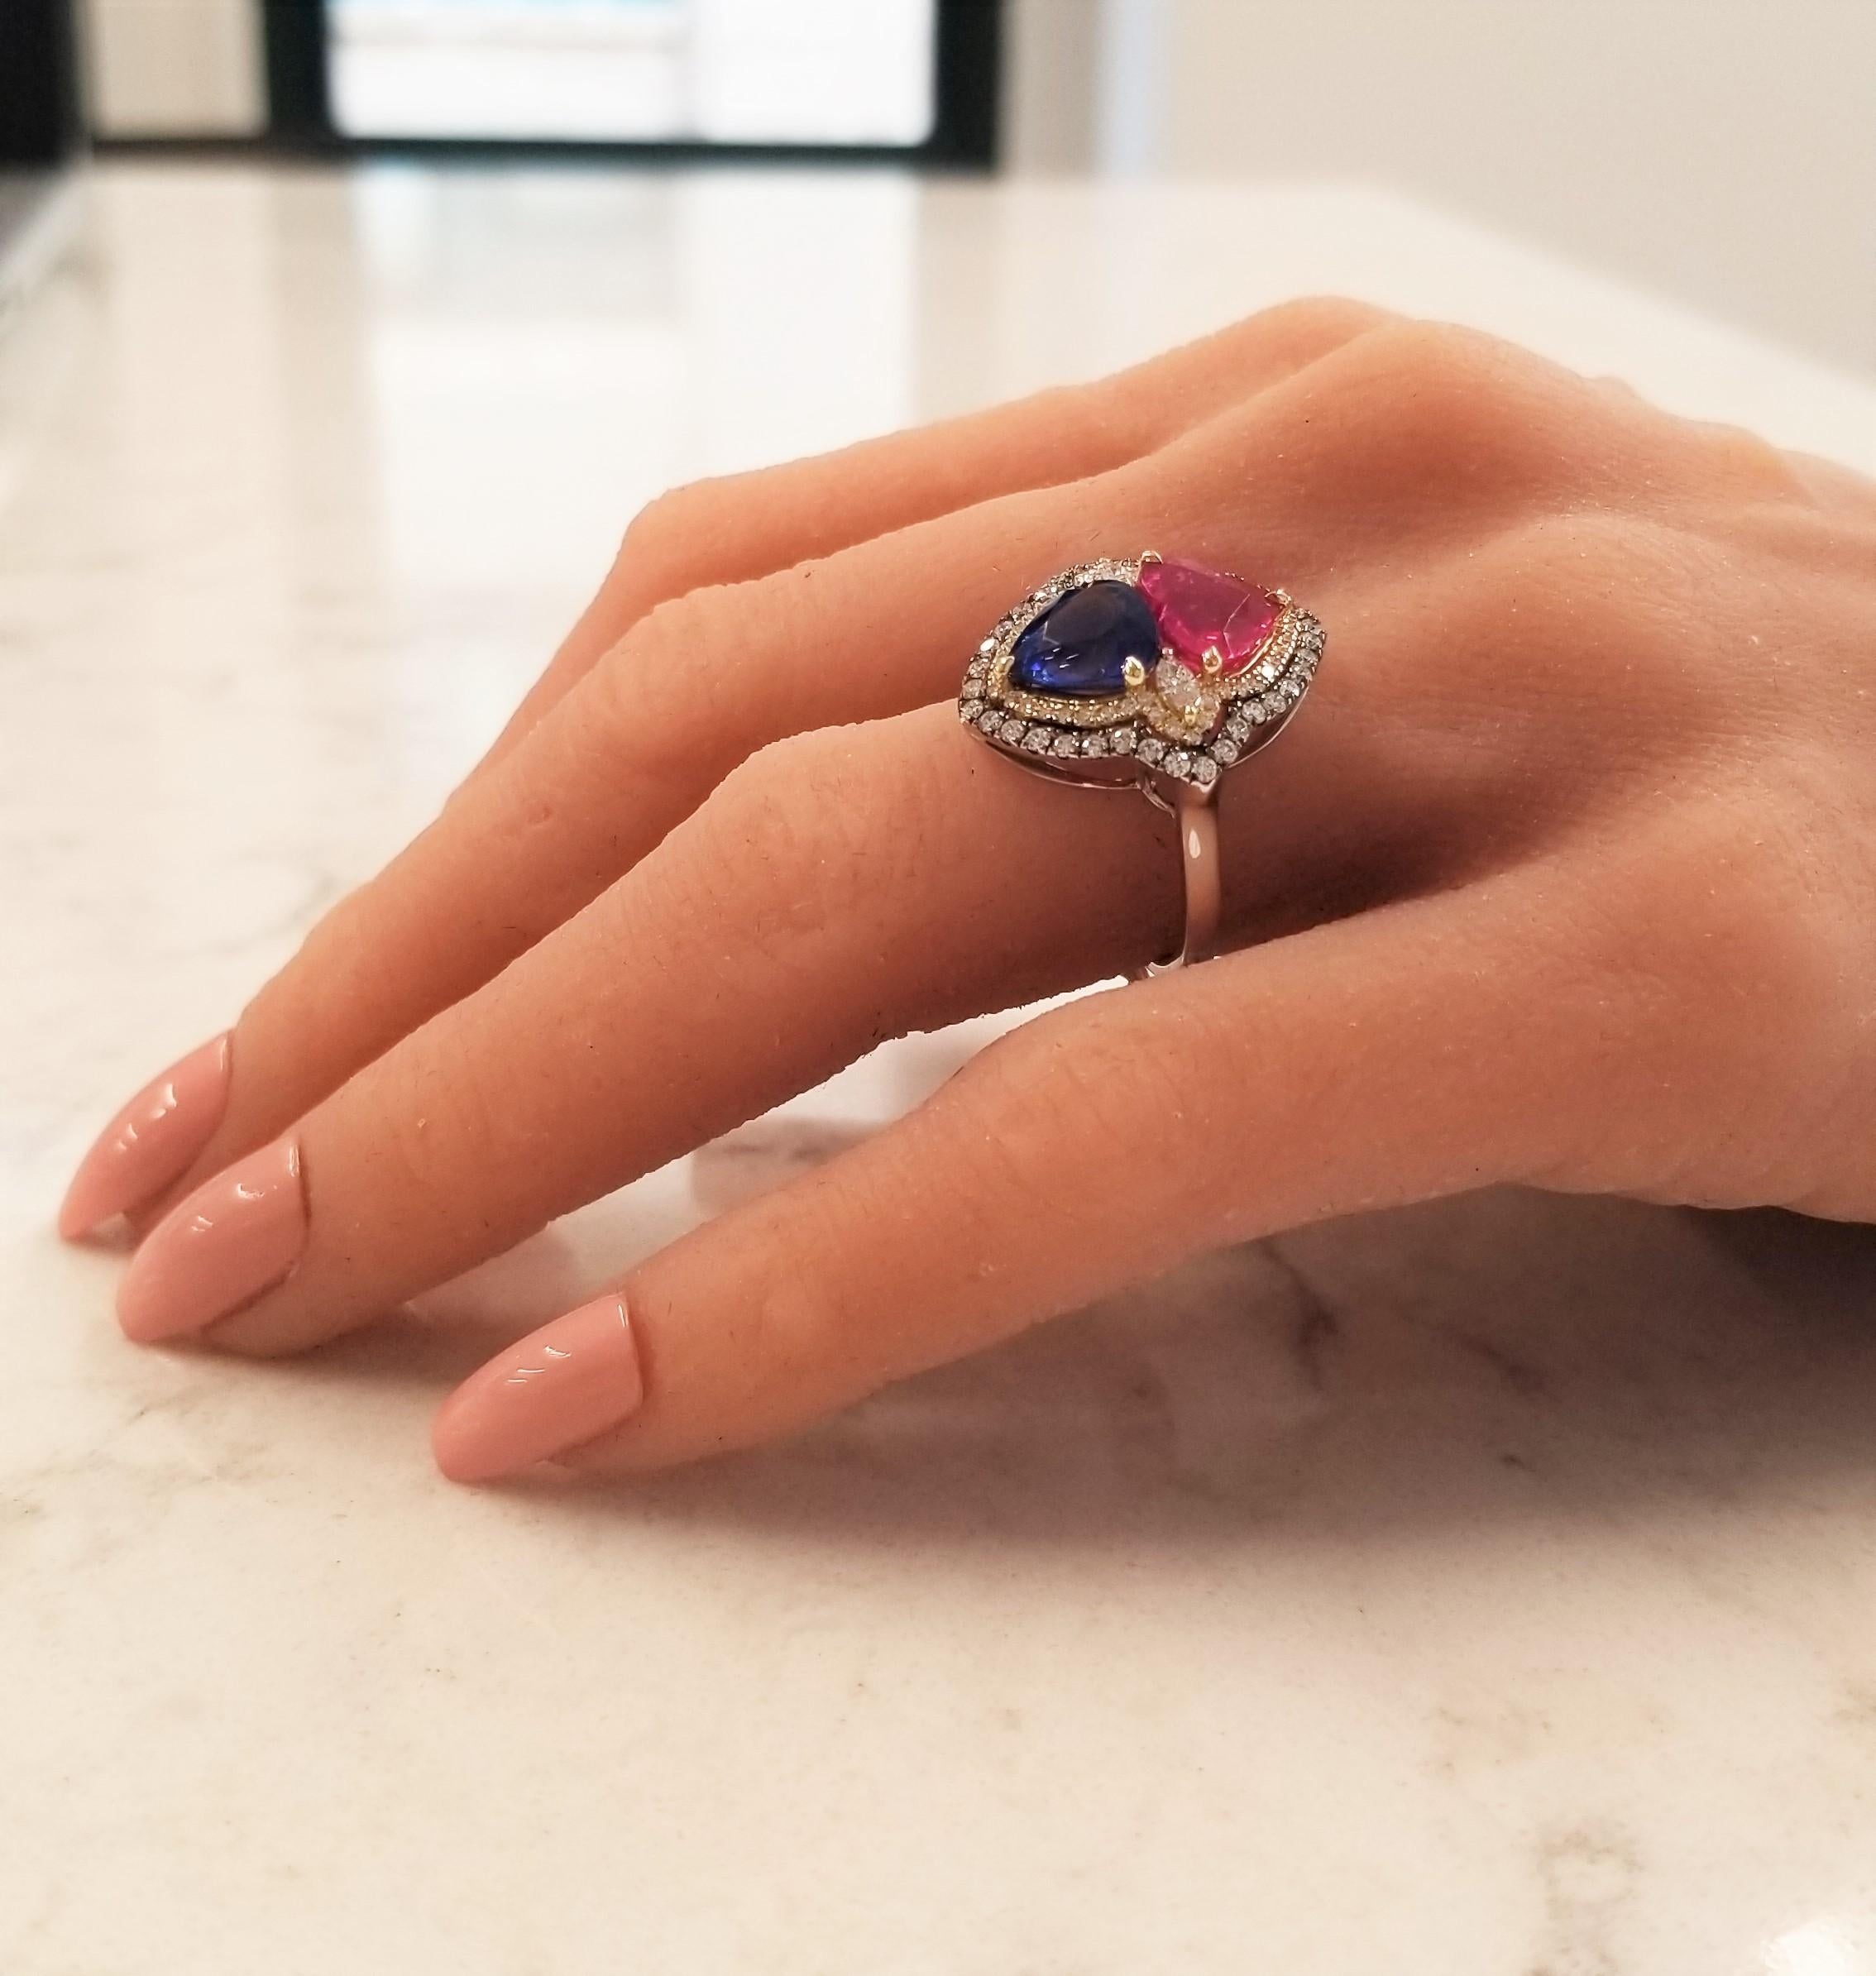 If you want an unparalleled design with top-end precious gems, consider this ring. A 3.02 carat, heart-shaped, blood red ruby is from Thailand. Its color is vibrant; its transparency and luster are excellent. Sharing the attention is a 2.70